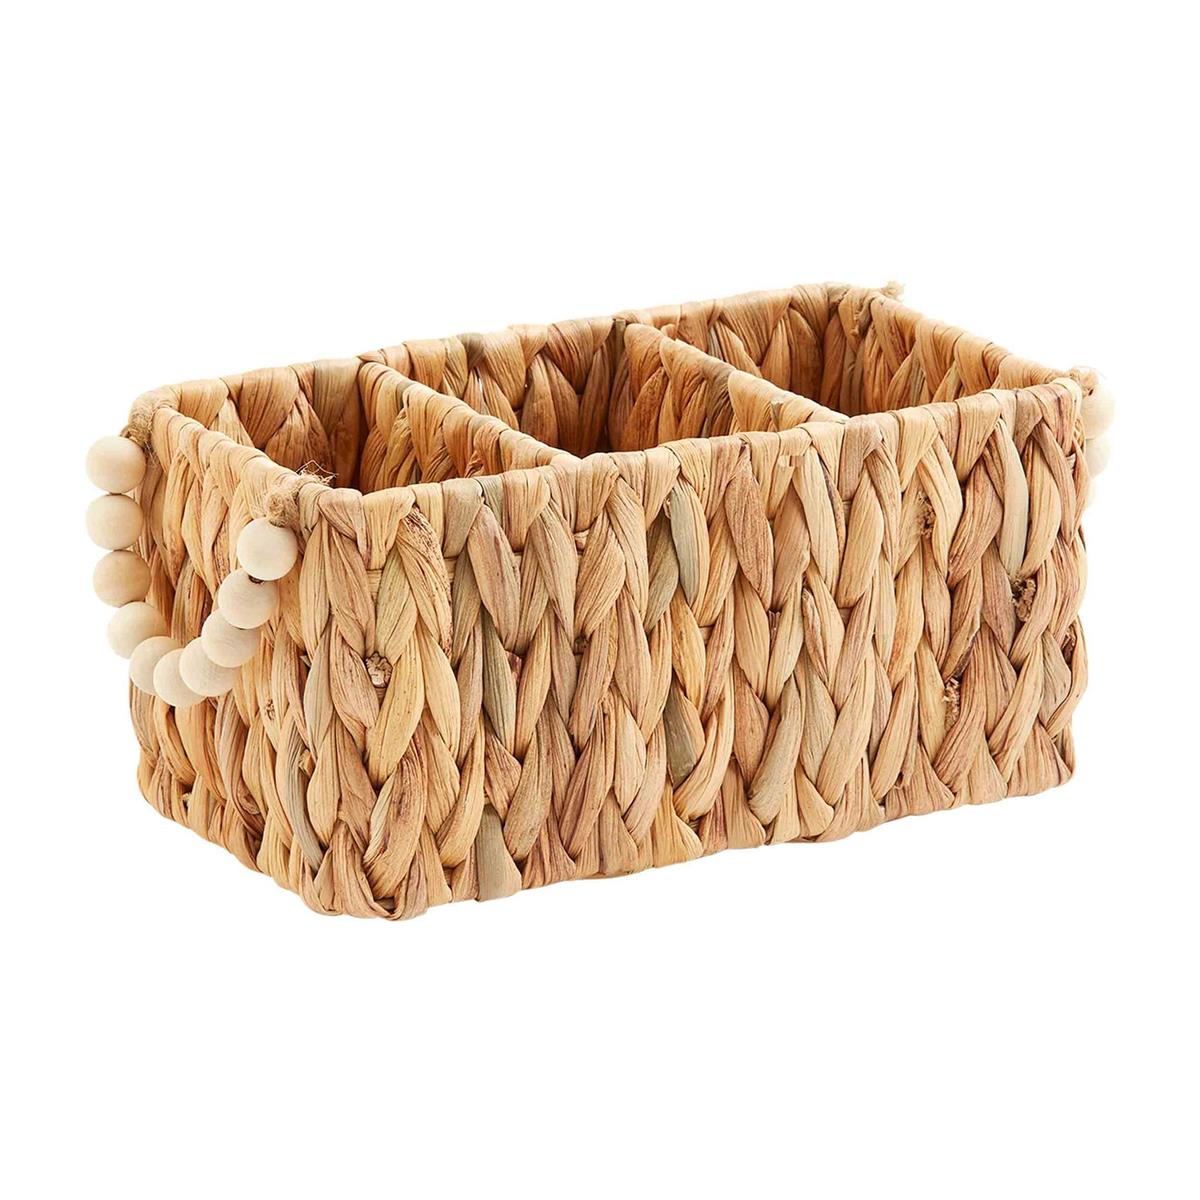 woven basket with 3 sections and beaded handles on a white background.